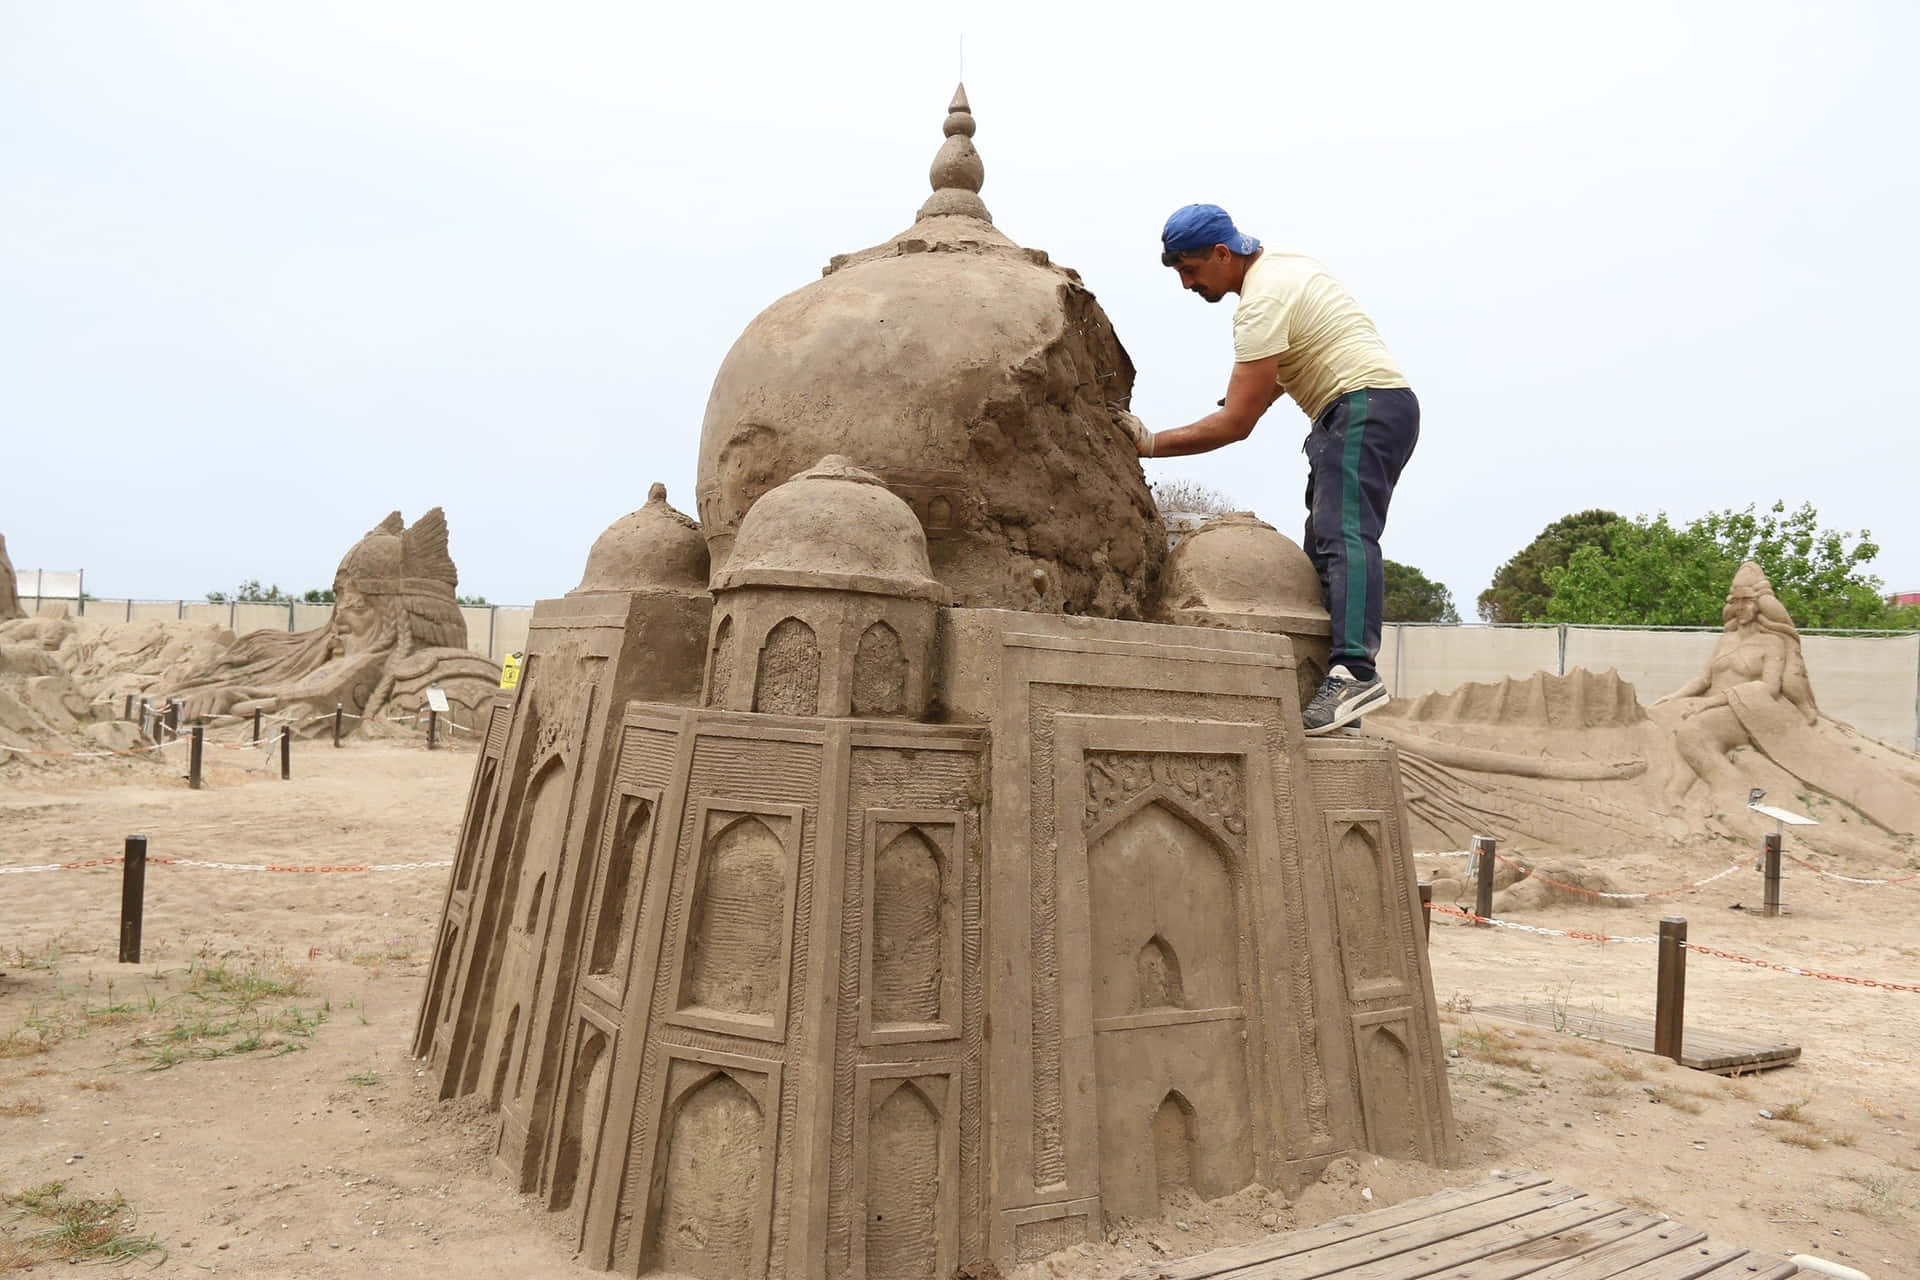 Create Your Own Unique Art With Sand Art